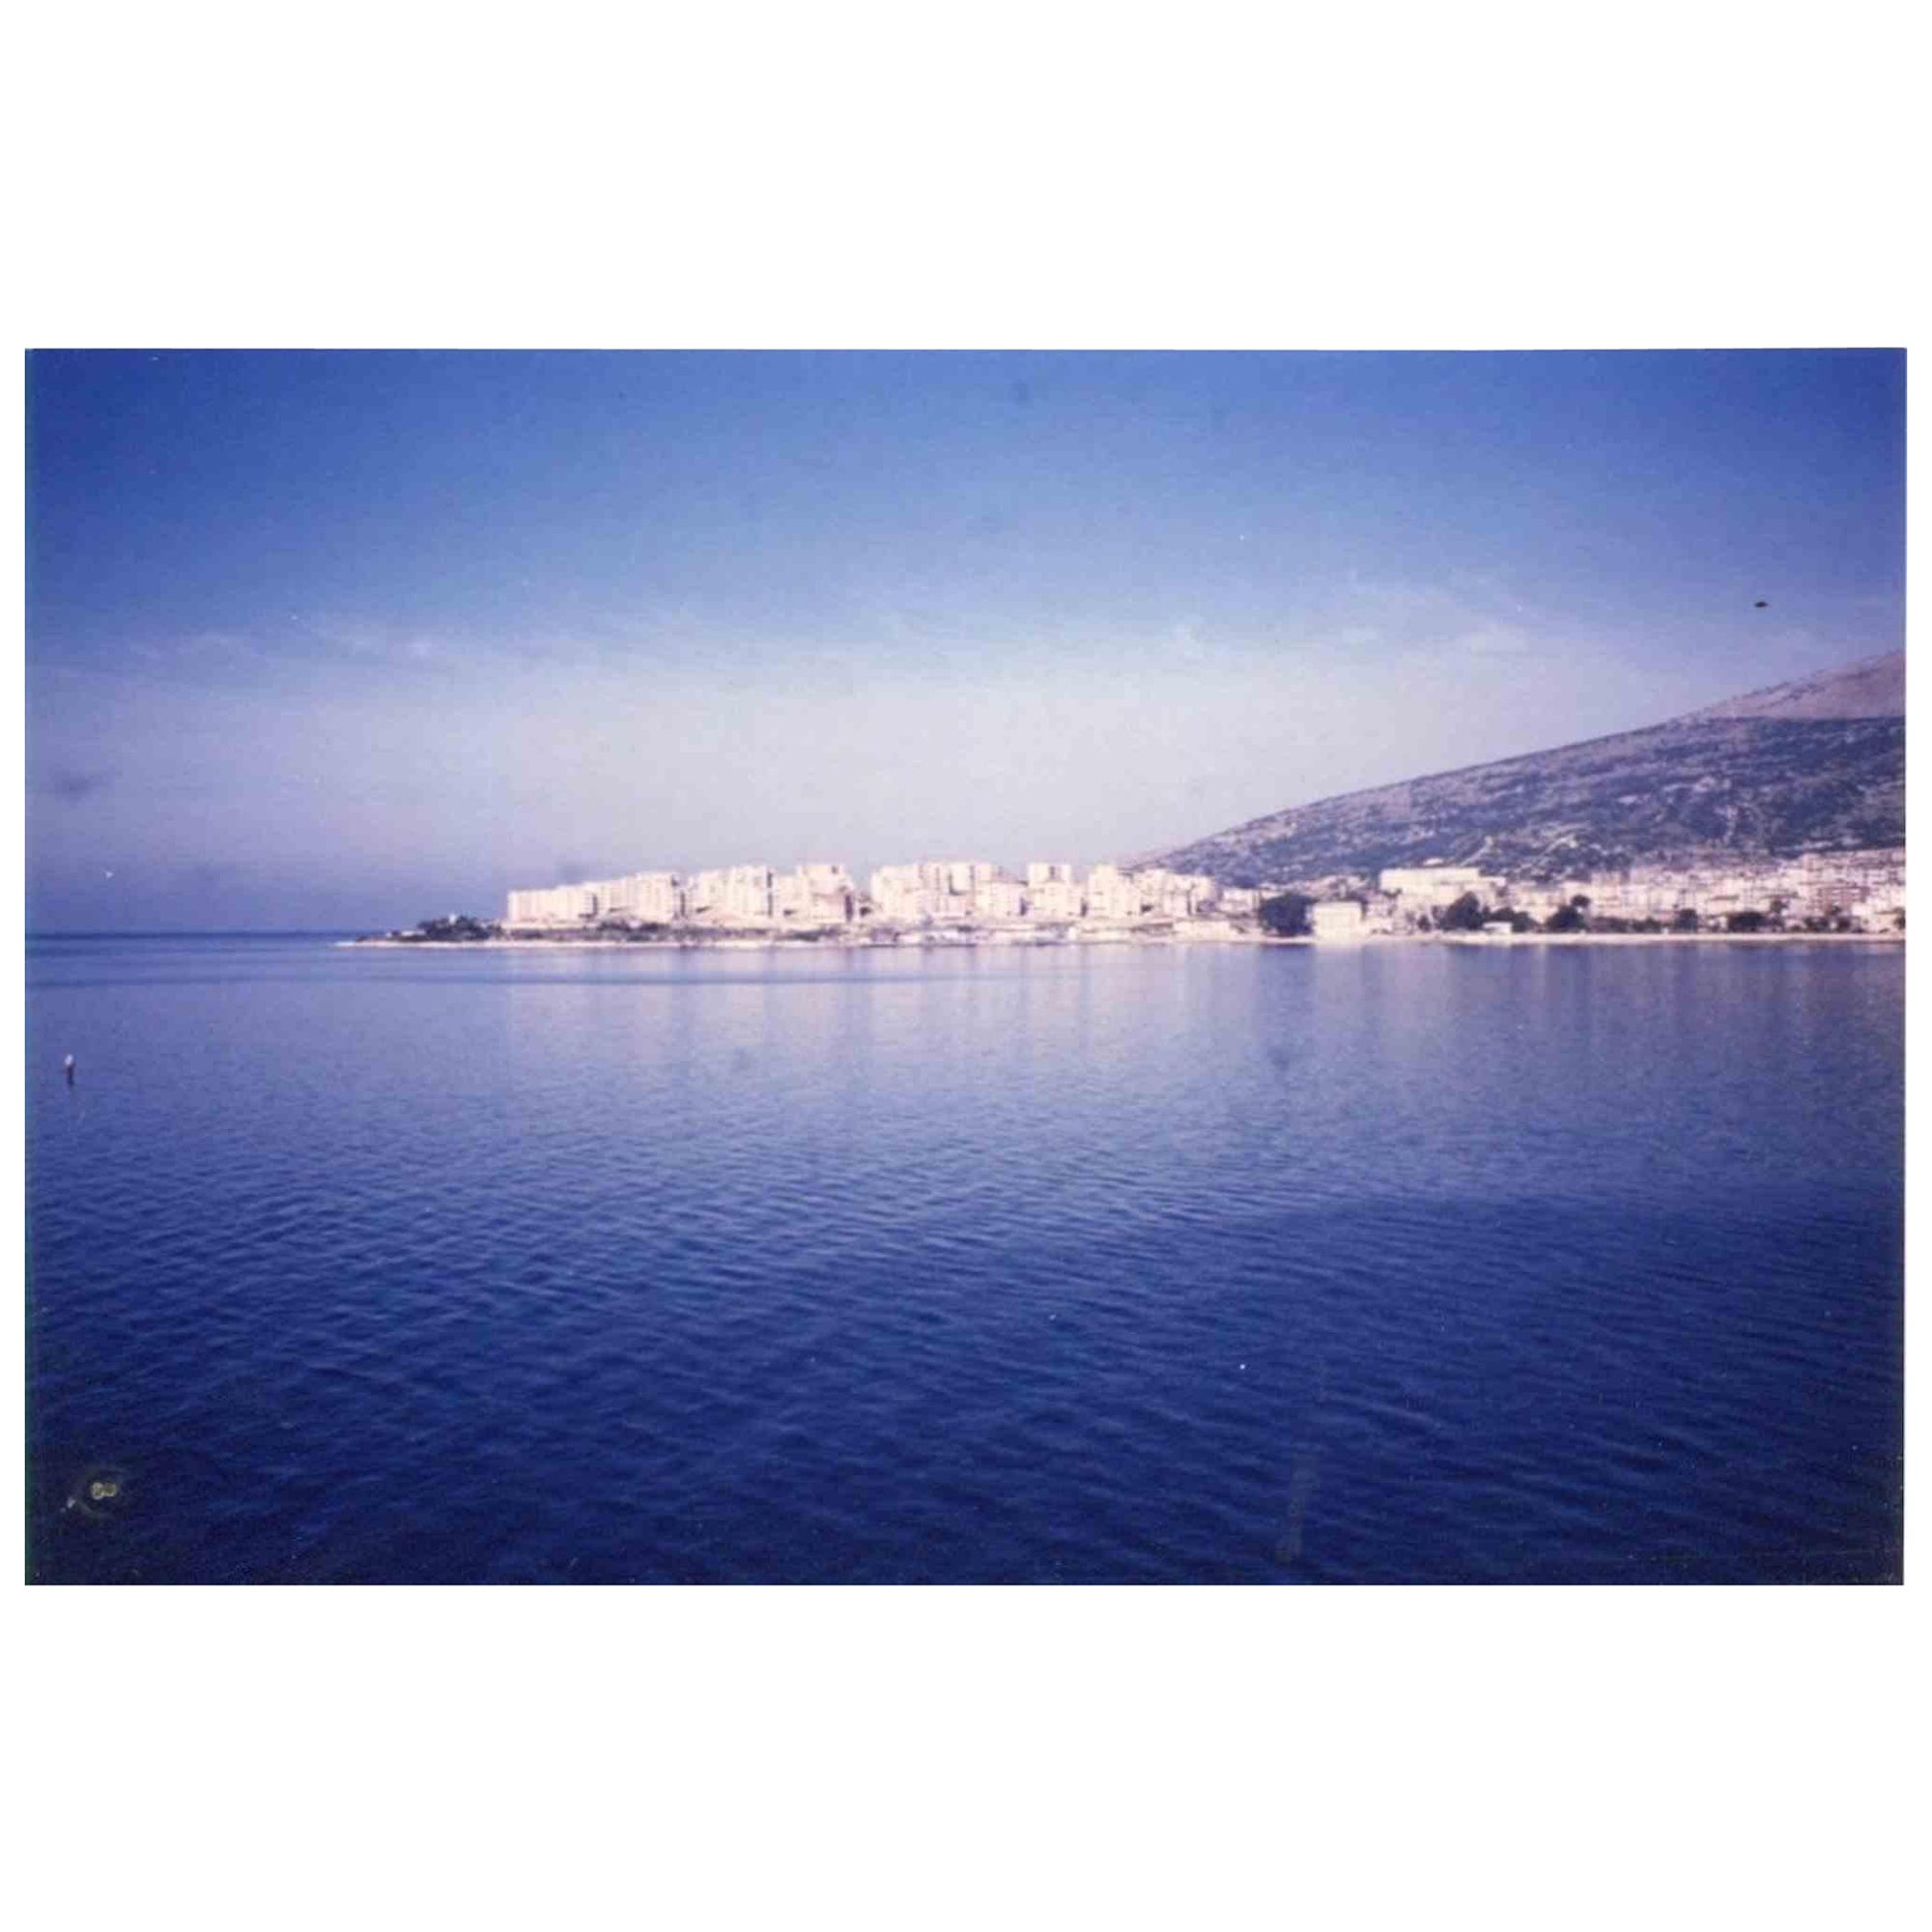 Unknown Black and White Photograph - Reportage from Albania - Saranda - Vintage Photograph - Late 1970s